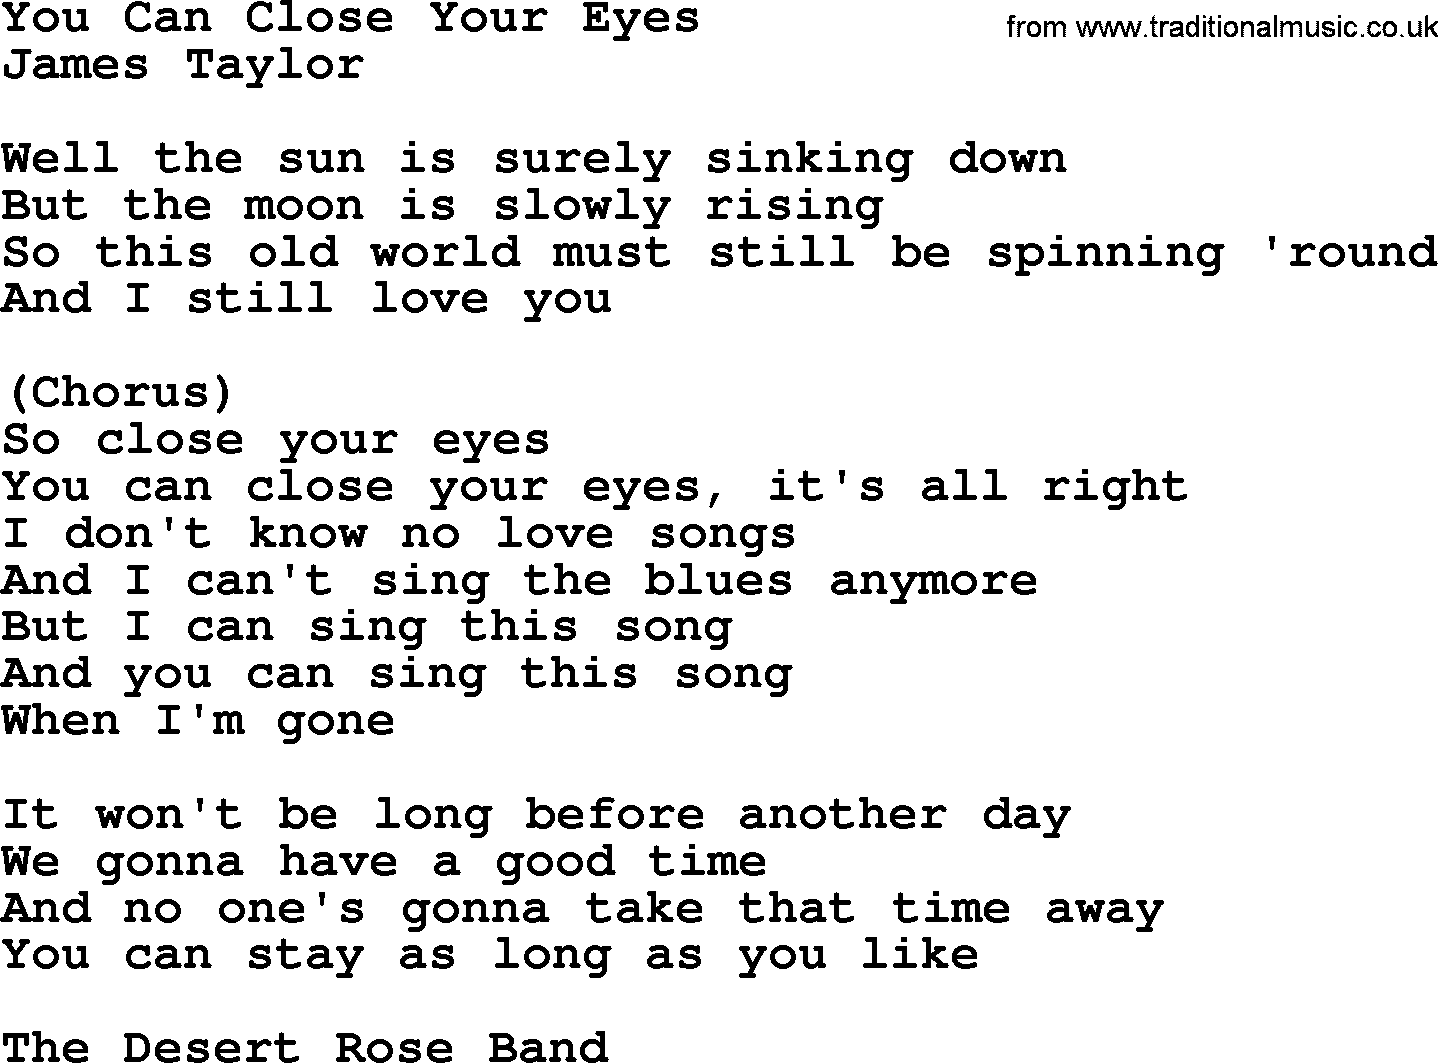 The Byrds song You Can Close Your Eyes, lyrics